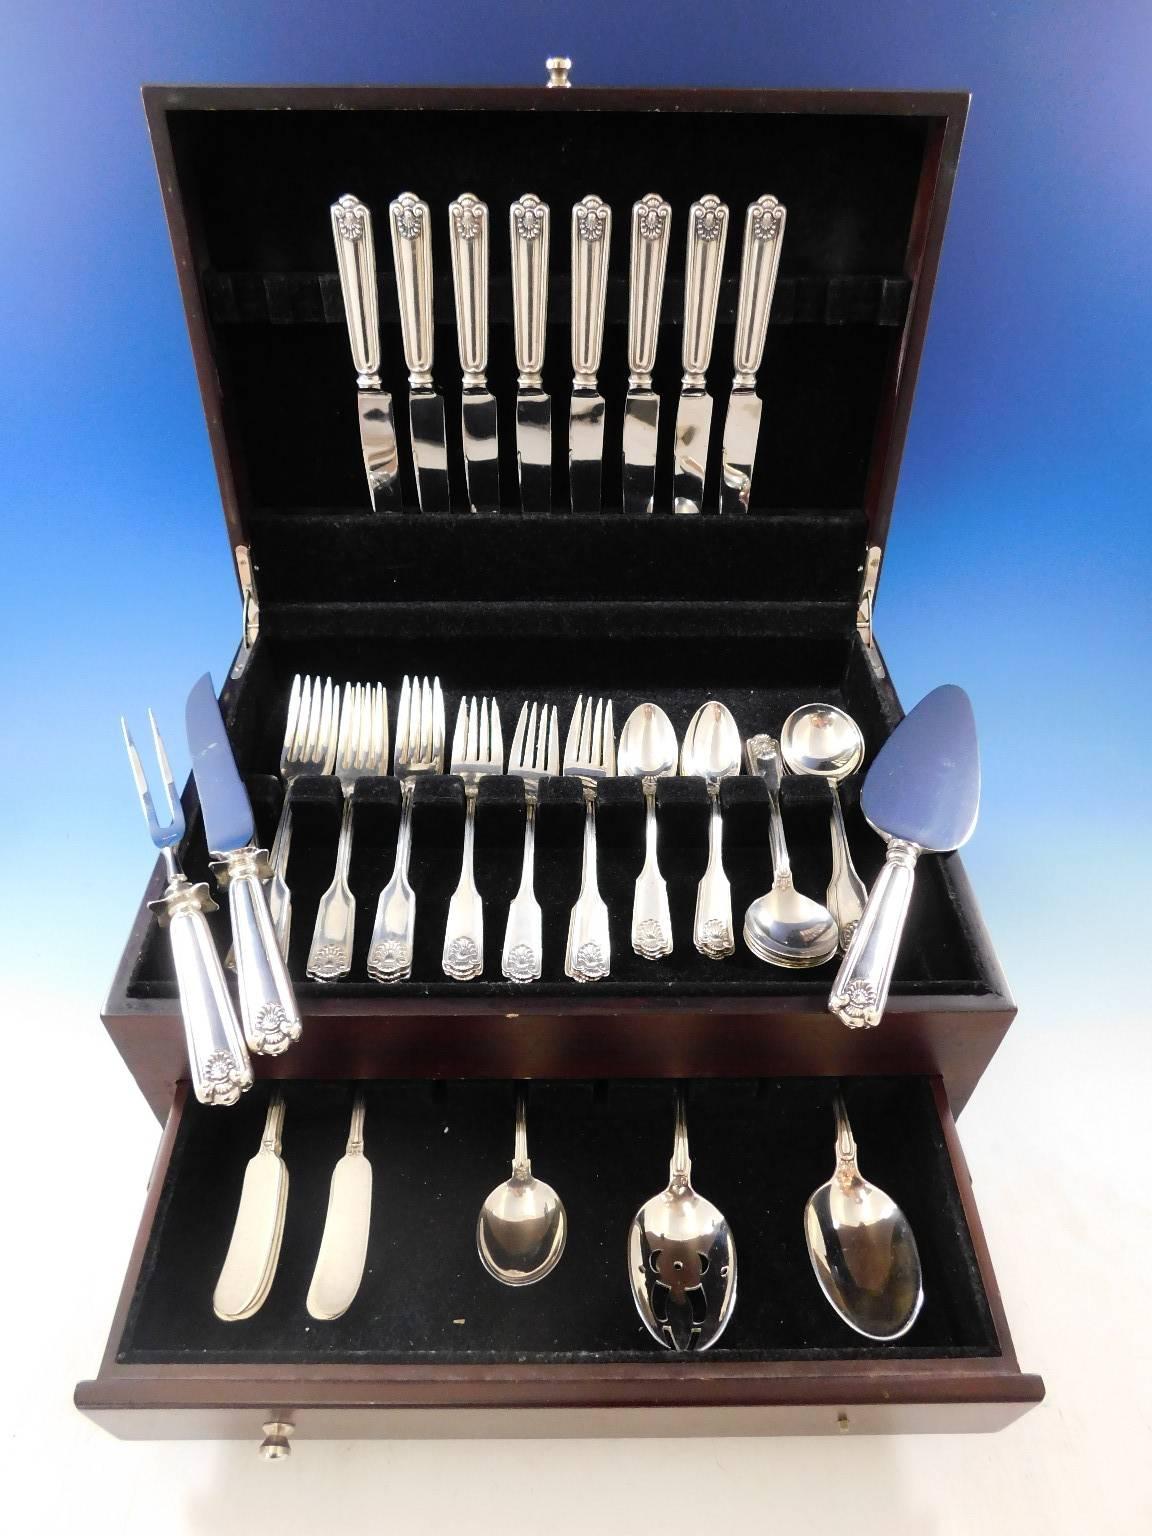 Fiddle Shell by Frank Smith sterling silver flatware set, 54 pieces. This set includes:

Eight knives, 8 1/2